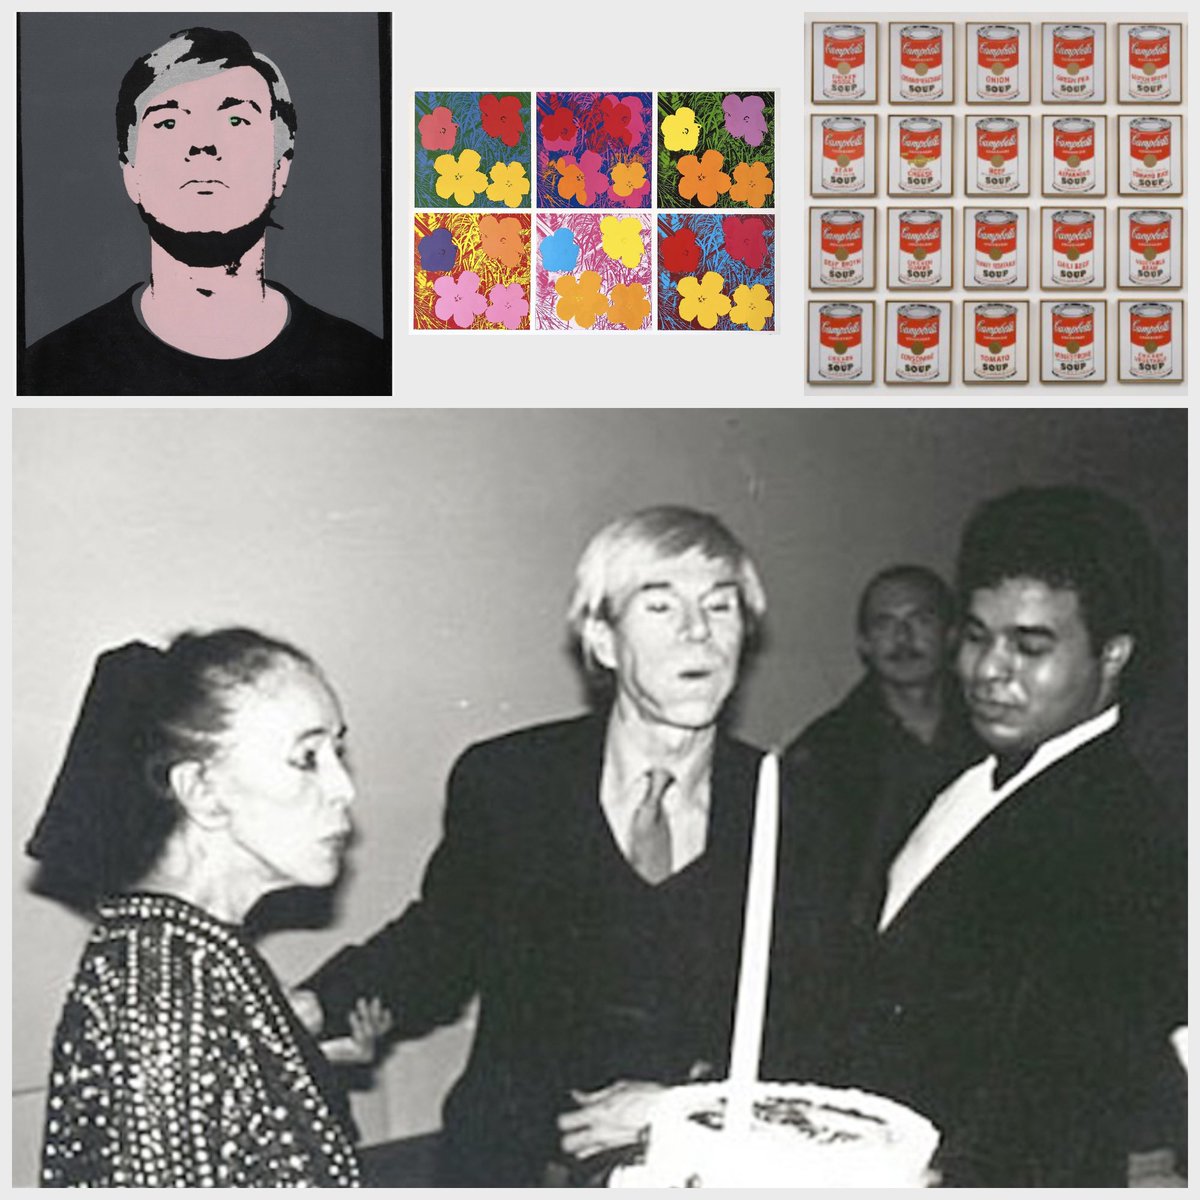 Happy Heavenly Birthday Andy. 🎂🥫📷
#andywarhol #contemporaryart #modernart #popart #masterpakusa #artpackaging #artintransit #protectart #unlinedshippers #titanstrongbox #mastercrate #artshippingcontainers #premiumgradeshippers